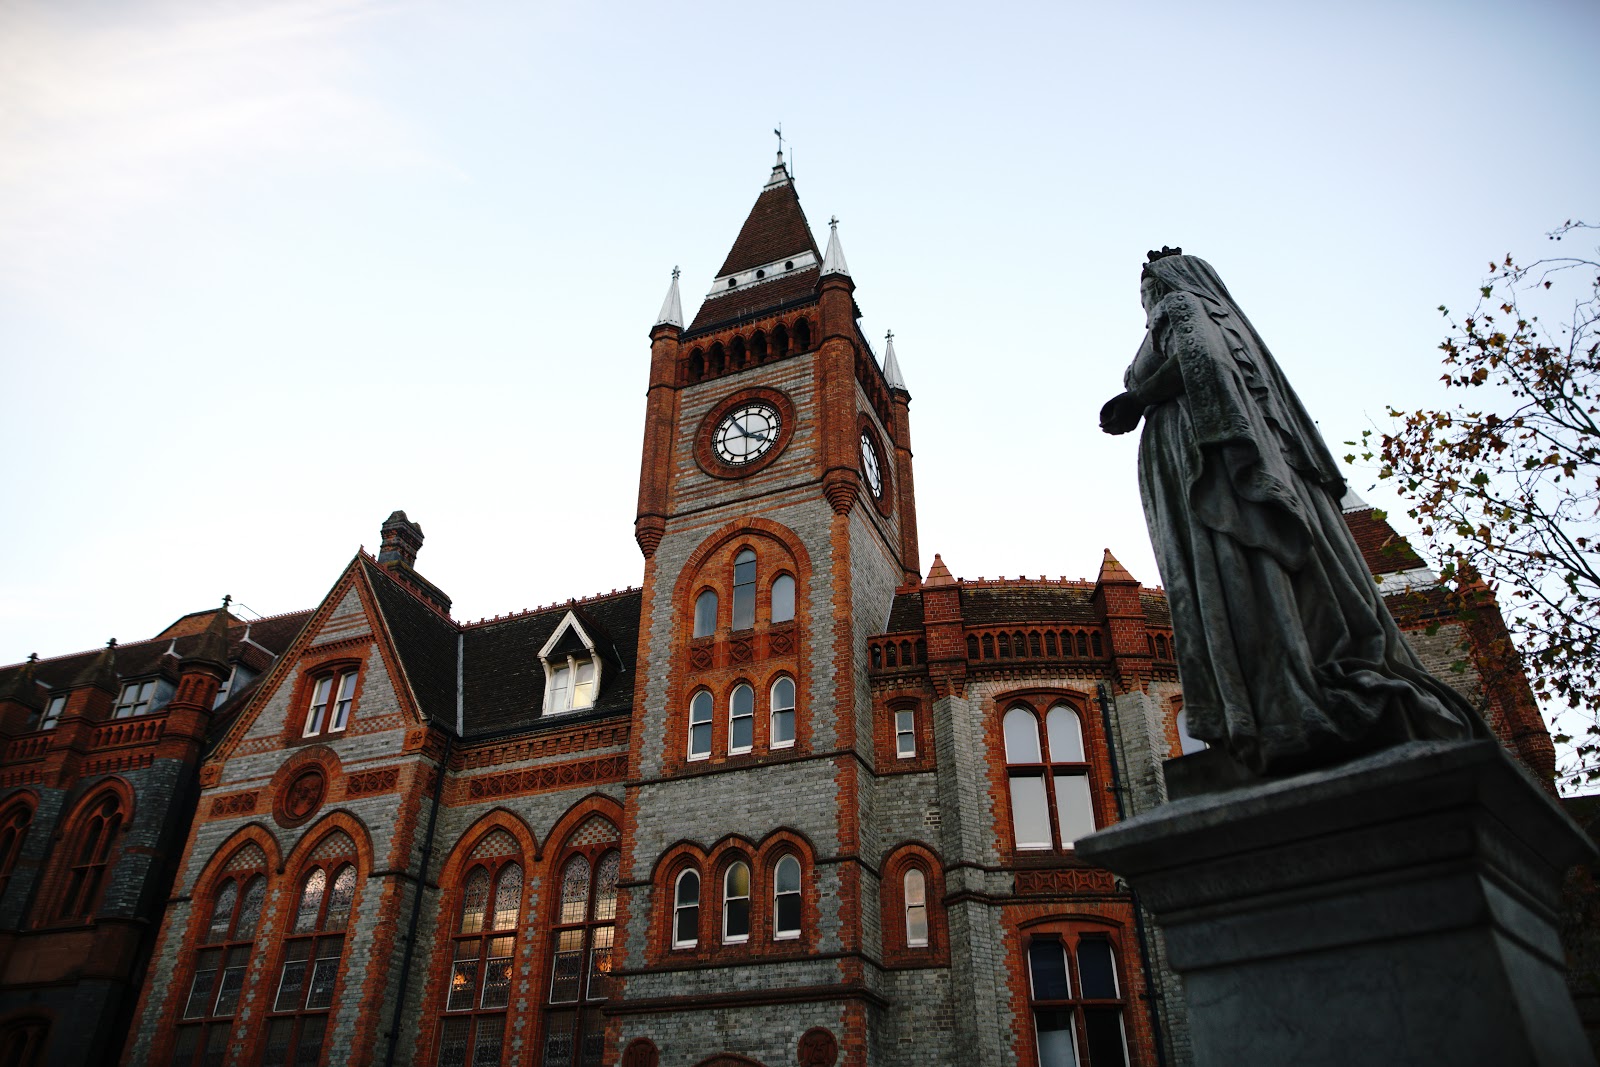 The Town Hall/Queen Victoria Statue